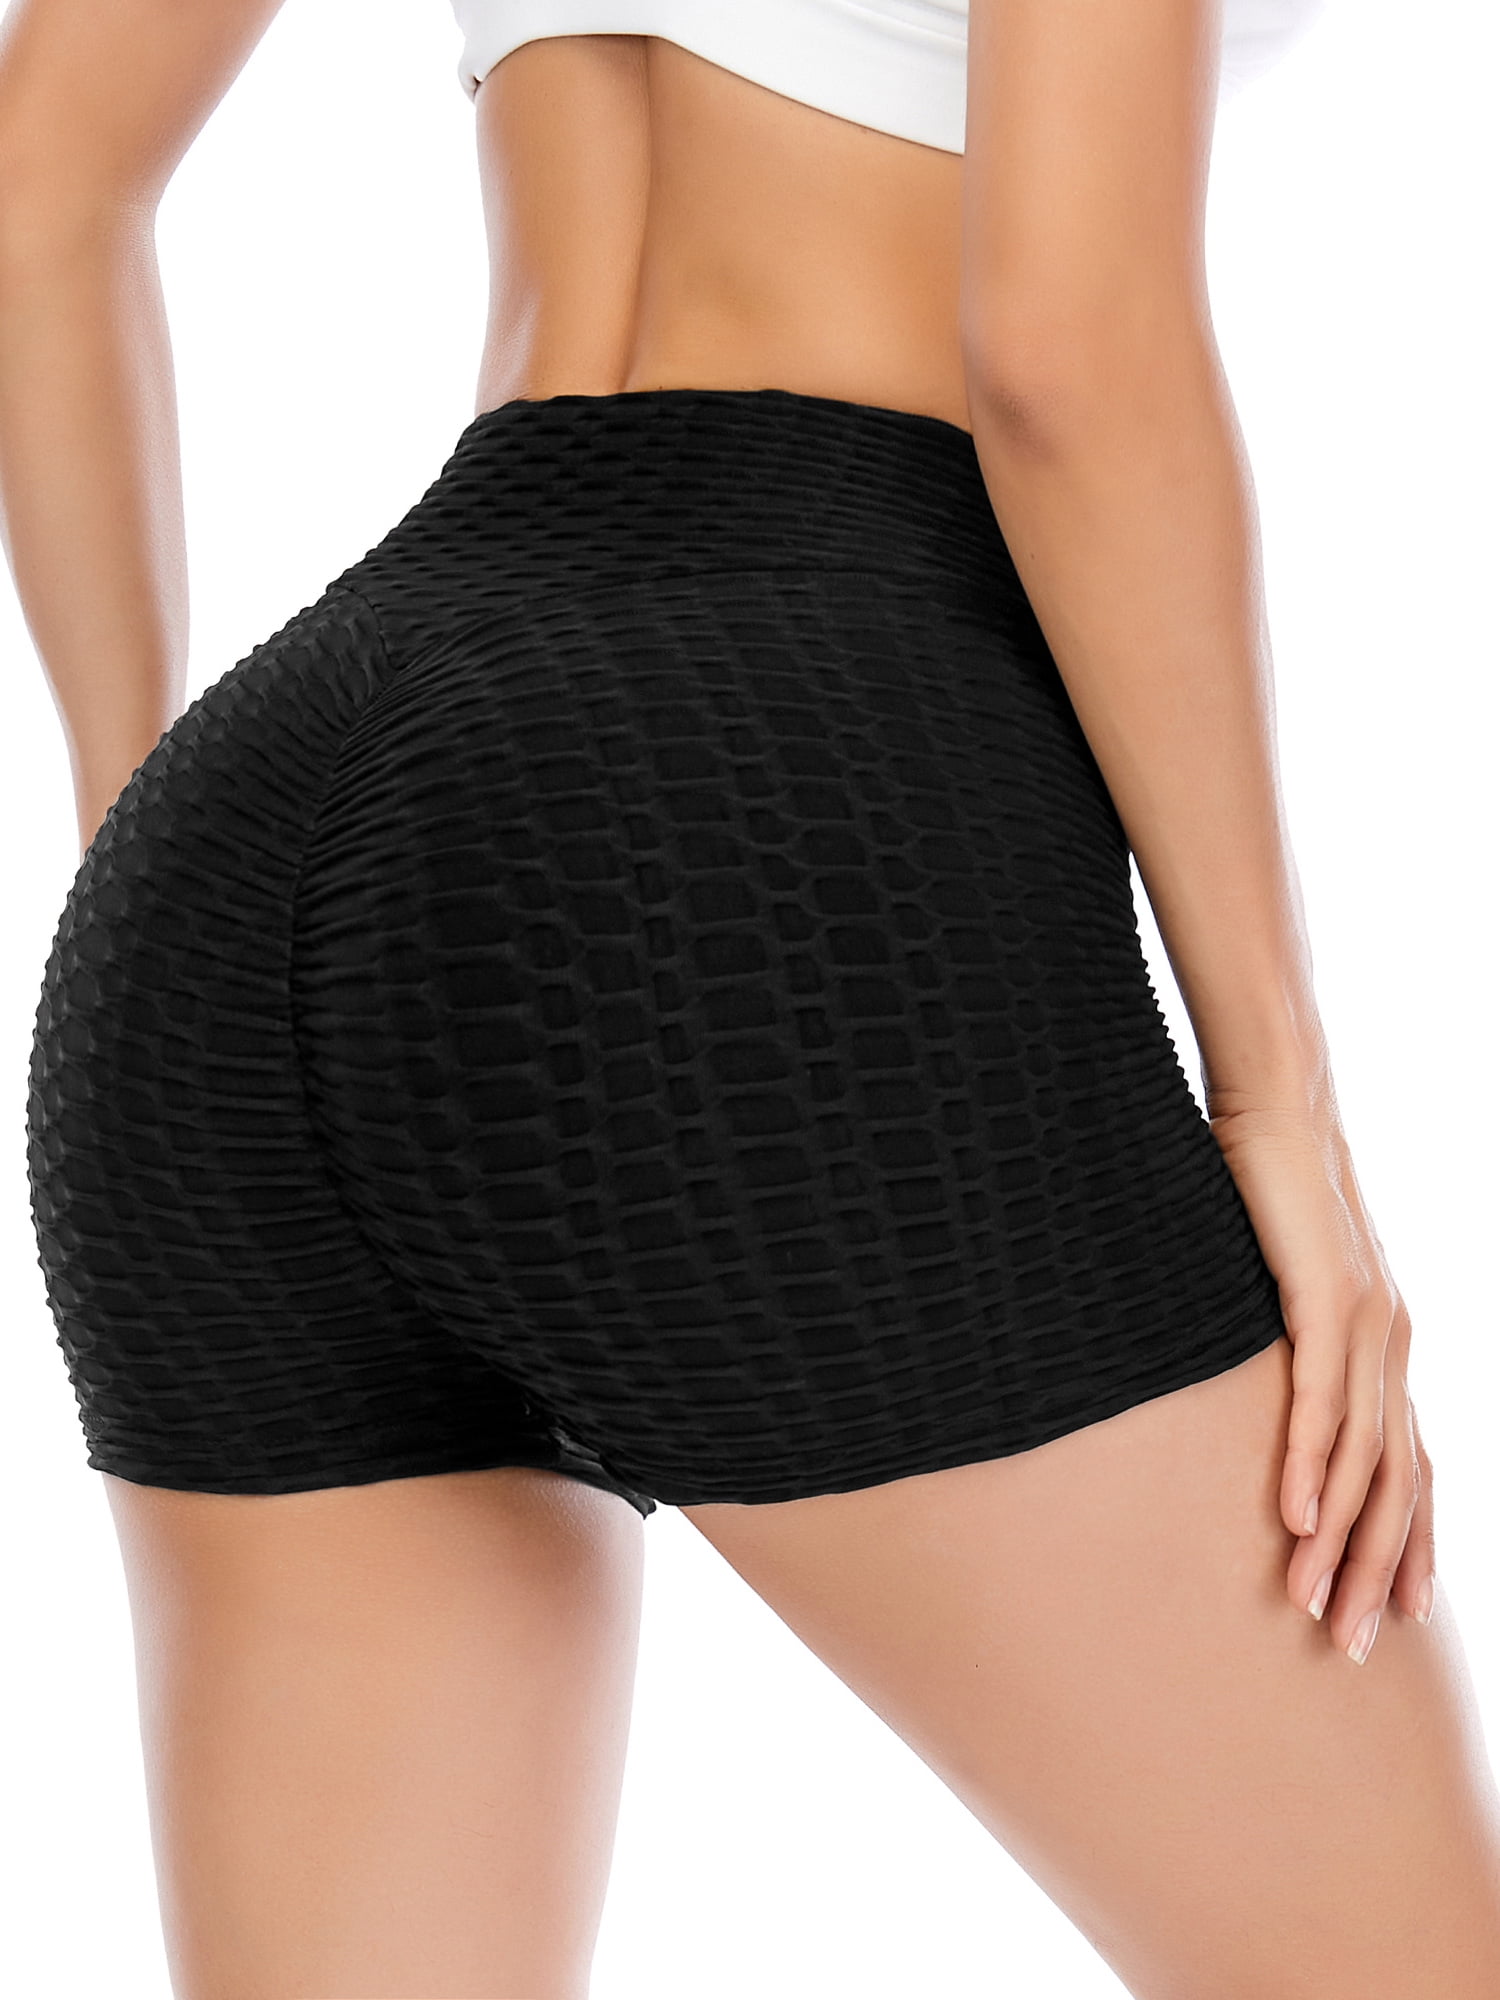 DODOING Yoga Hot Shorts for Women Tummy Control Workout Shorts Butt Lifting  Ruched Sportwear, Black 